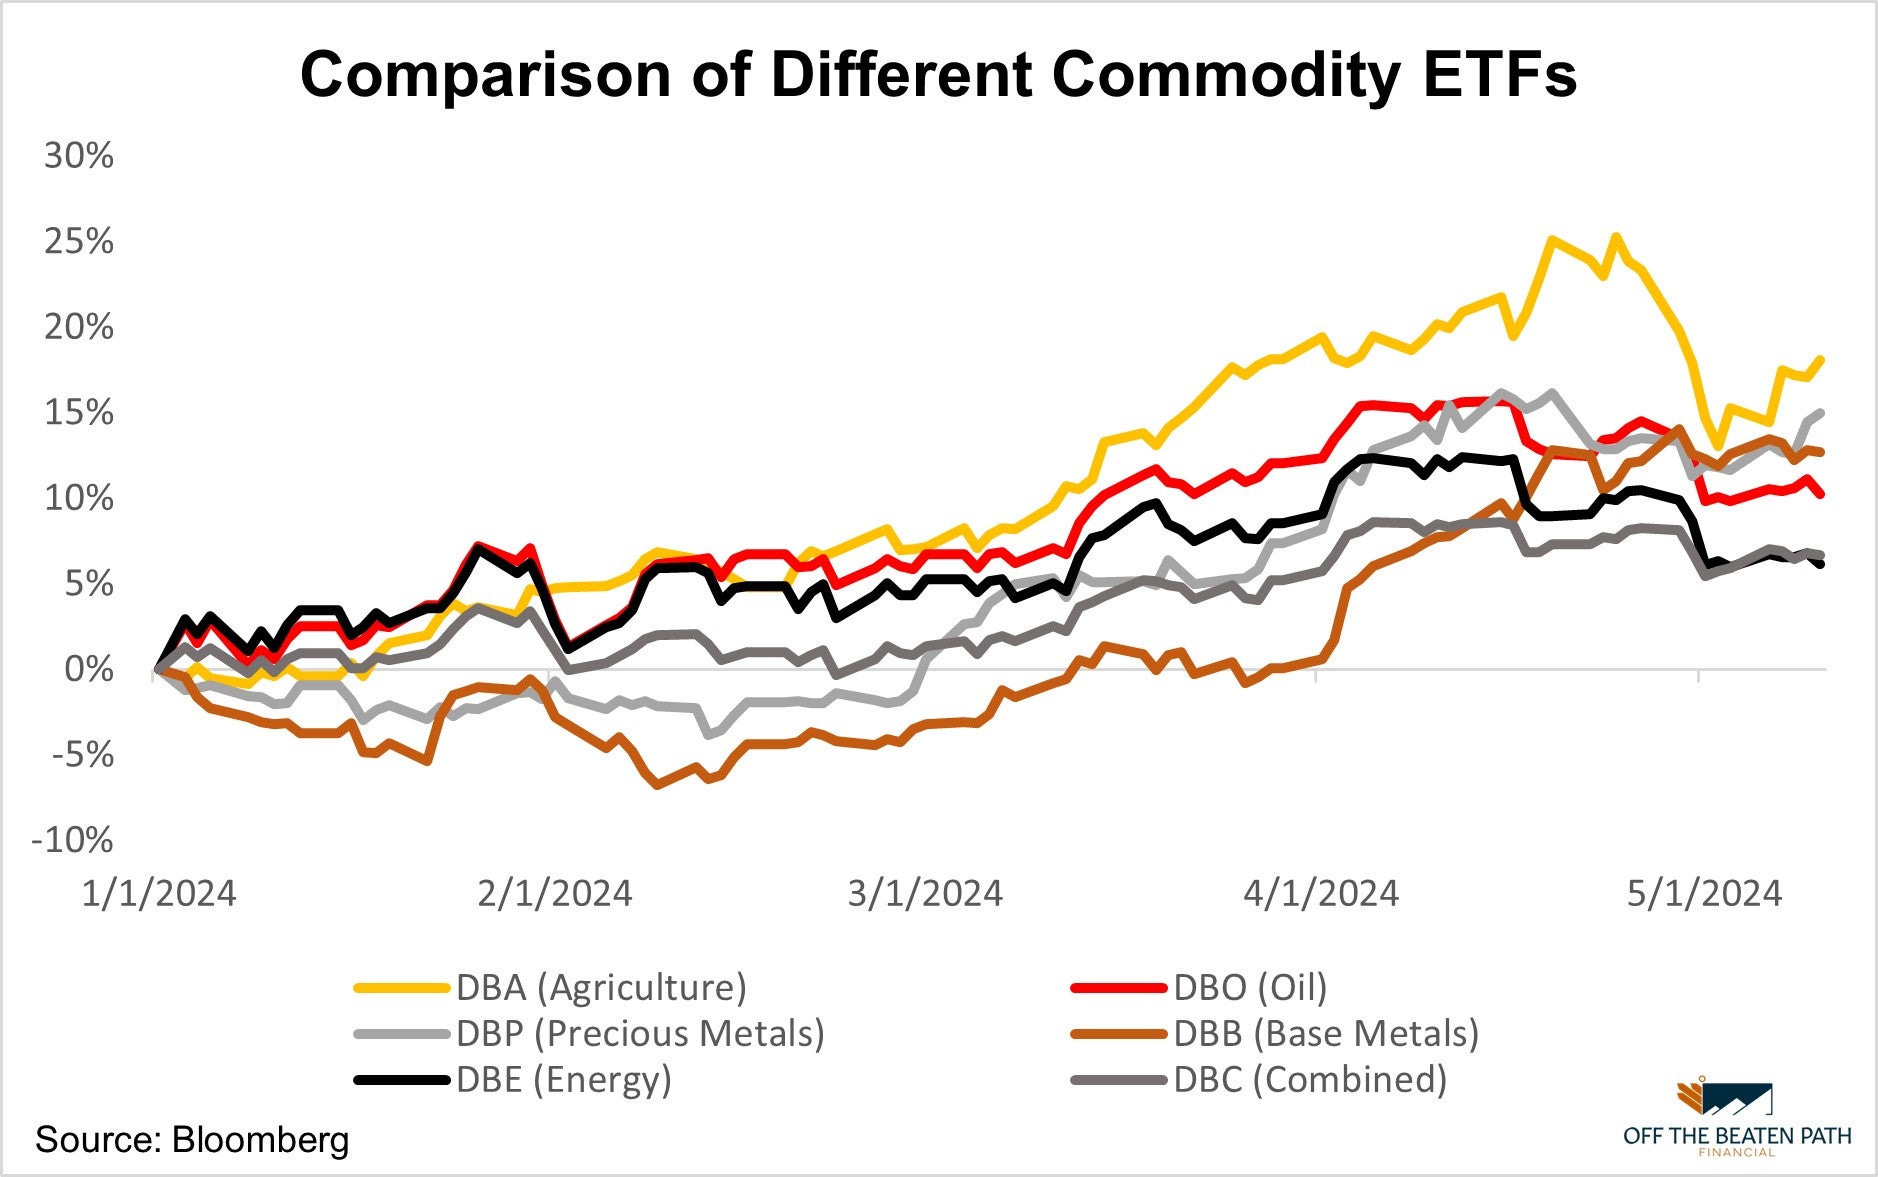 obp_financial_-_commodity_comparison_-_may_10th_2024.jpg